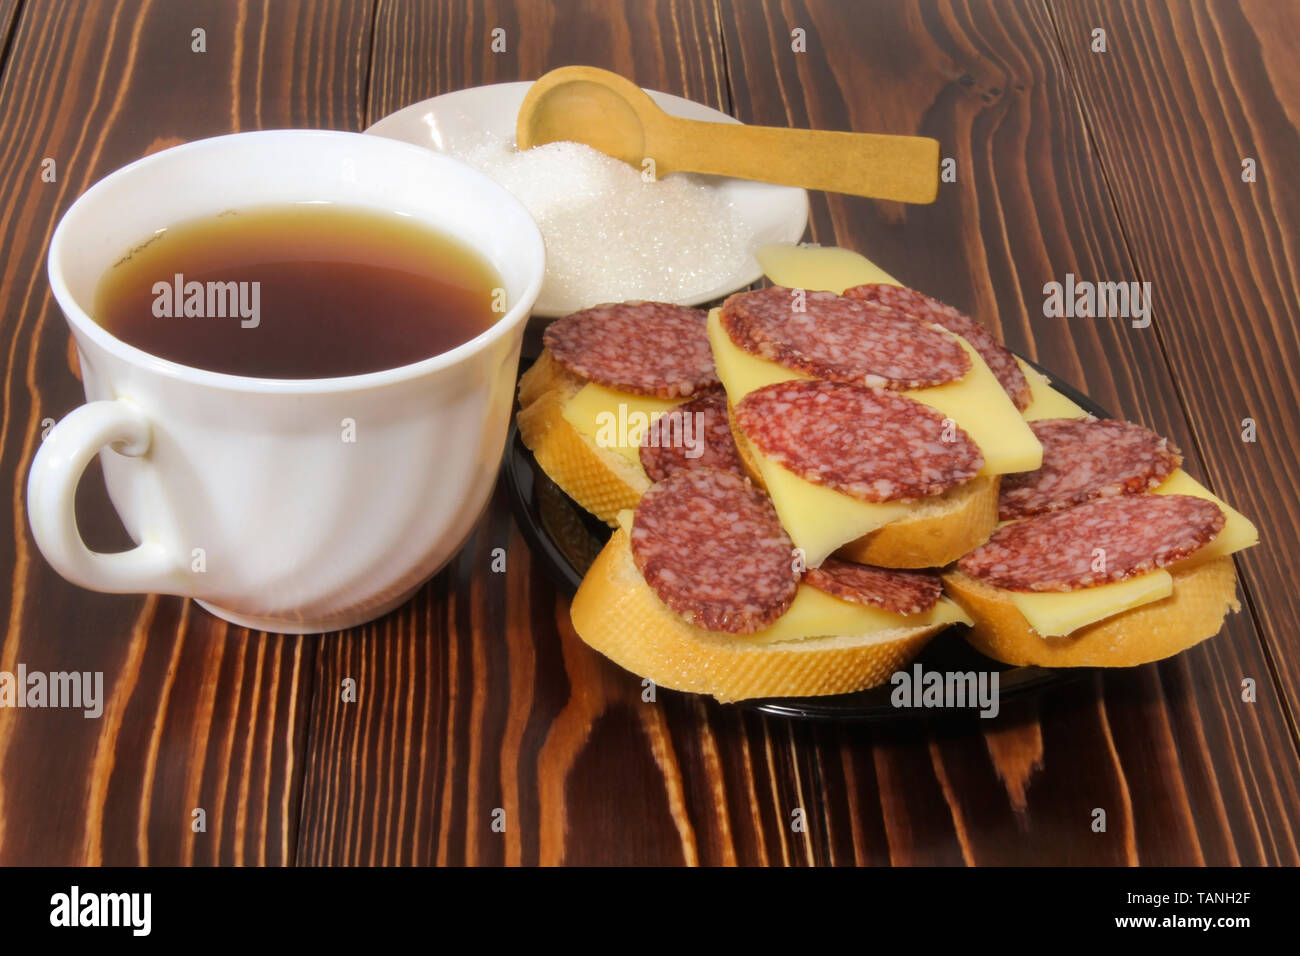 Sandwiches with cheese and smoked sausage, and tea Stock Photo